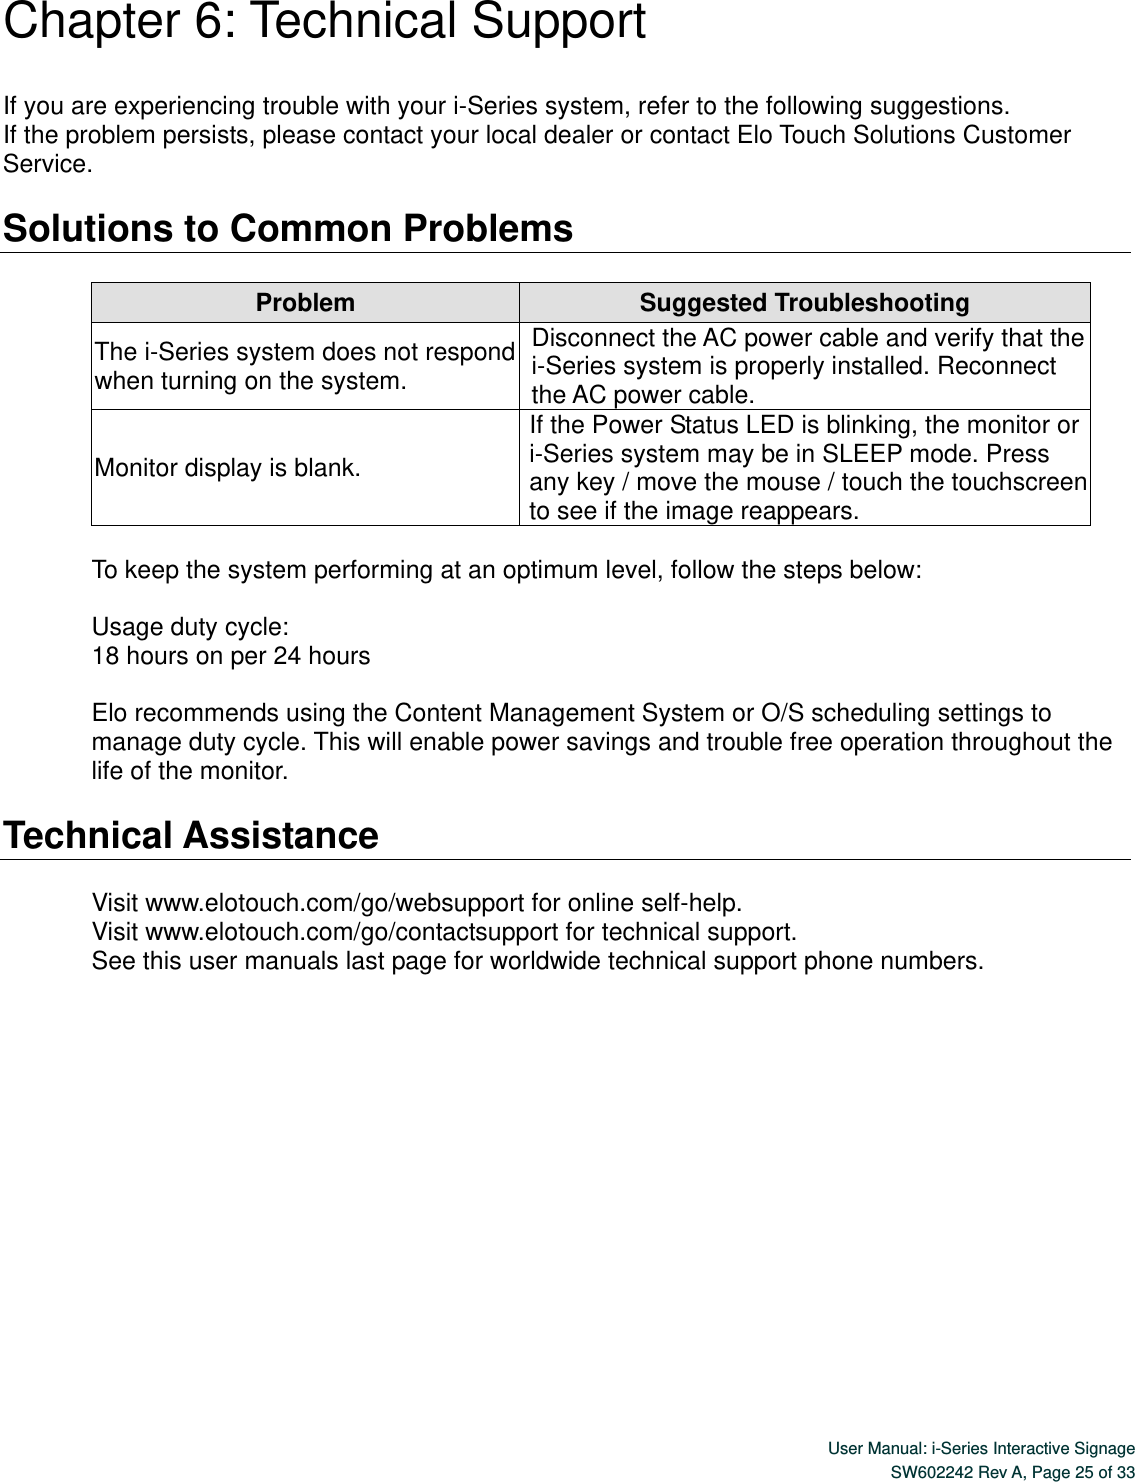  User Manual: i-Series Interactive Signage SW602242 Rev A, Page 25 of 33   Chapter 6: Technical Support  If you are experiencing trouble with your i-Series system, refer to the following suggestions. If the problem persists, please contact your local dealer or contact Elo Touch Solutions Customer Service.  Solutions to Common Problems  Problem Suggested Troubleshooting The i-Series system does not respond when turning on the system. Disconnect the AC power cable and verify that the i-Series system is properly installed. Reconnect the AC power cable. Monitor display is blank. If the Power Status LED is blinking, the monitor or i-Series system may be in SLEEP mode. Press any key / move the mouse / touch the touchscreen to see if the image reappears.  To keep the system performing at an optimum level, follow the steps below:  Usage duty cycle: 18 hours on per 24 hours    Elo recommends using the Content Management System or O/S scheduling settings to manage duty cycle. This will enable power savings and trouble free operation throughout the life of the monitor.  Technical Assistance  Visit www.elotouch.com/go/websupport for online self-help. Visit www.elotouch.com/go/contactsupport for technical support. See this user manuals last page for worldwide technical support phone numbers.        